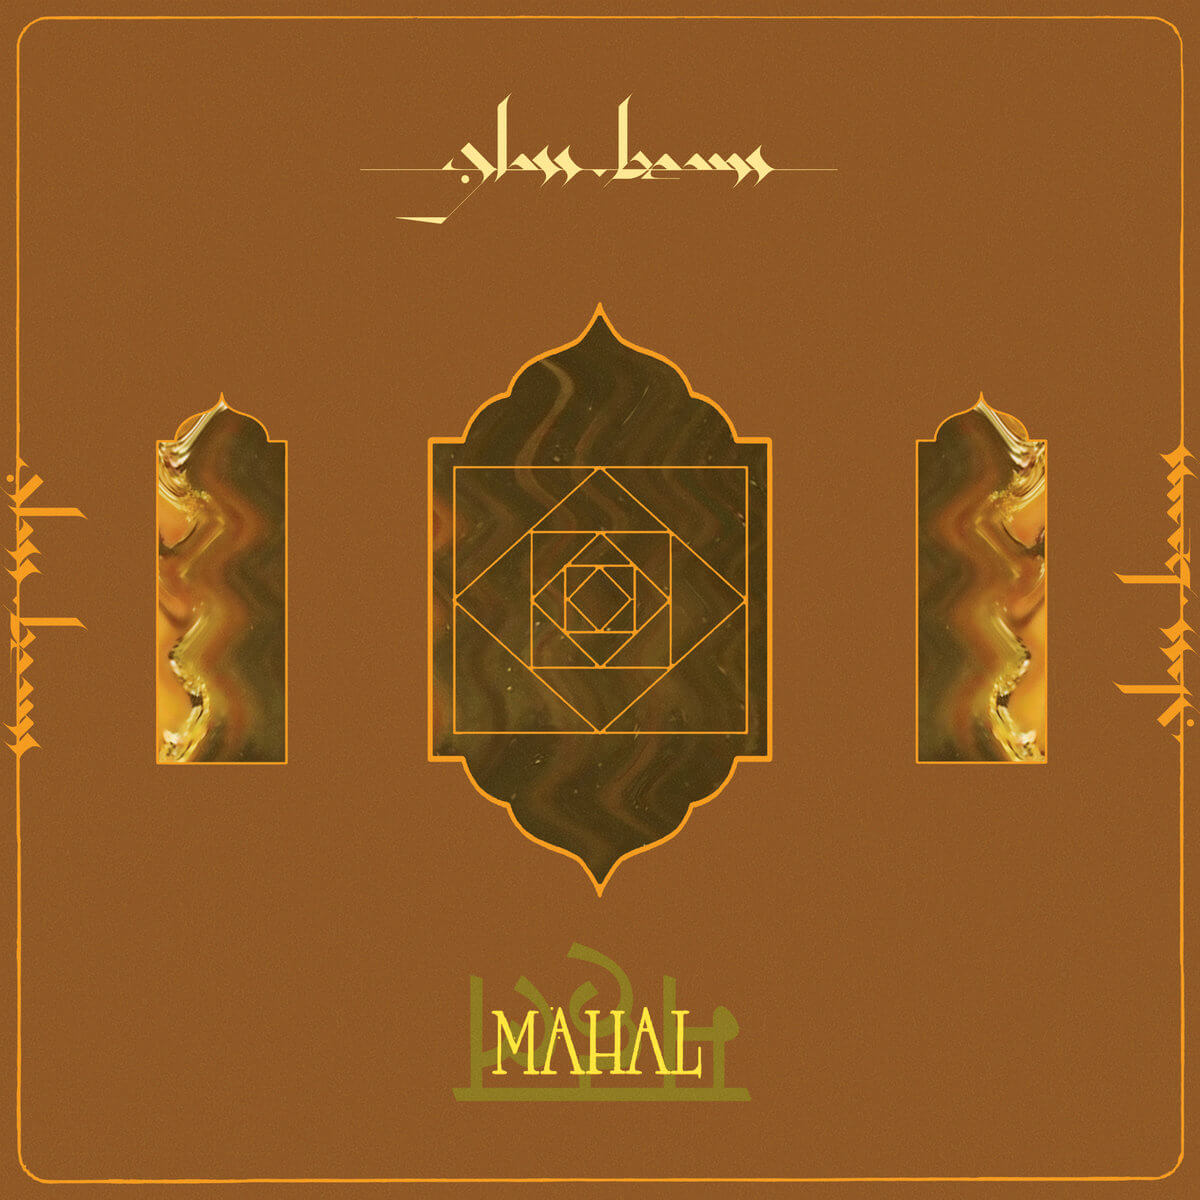 "Mahal" - Glass Beams Album Review by Ethan Rebalkin for Nothern Transmissions